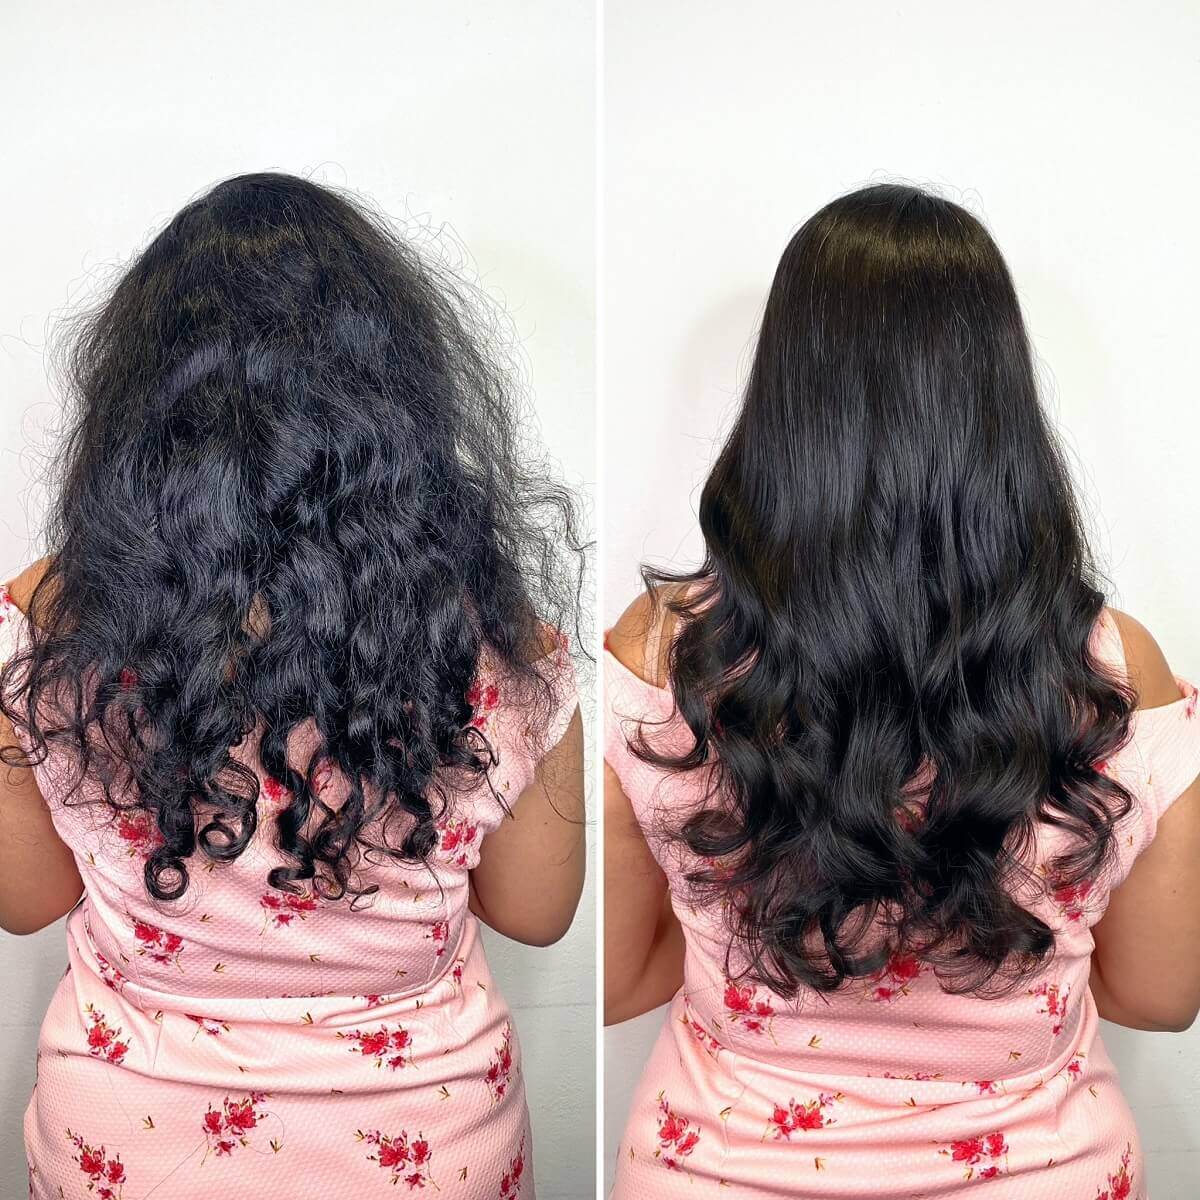 Sugar Hair Lamination has different curl reduction intensity to choose from